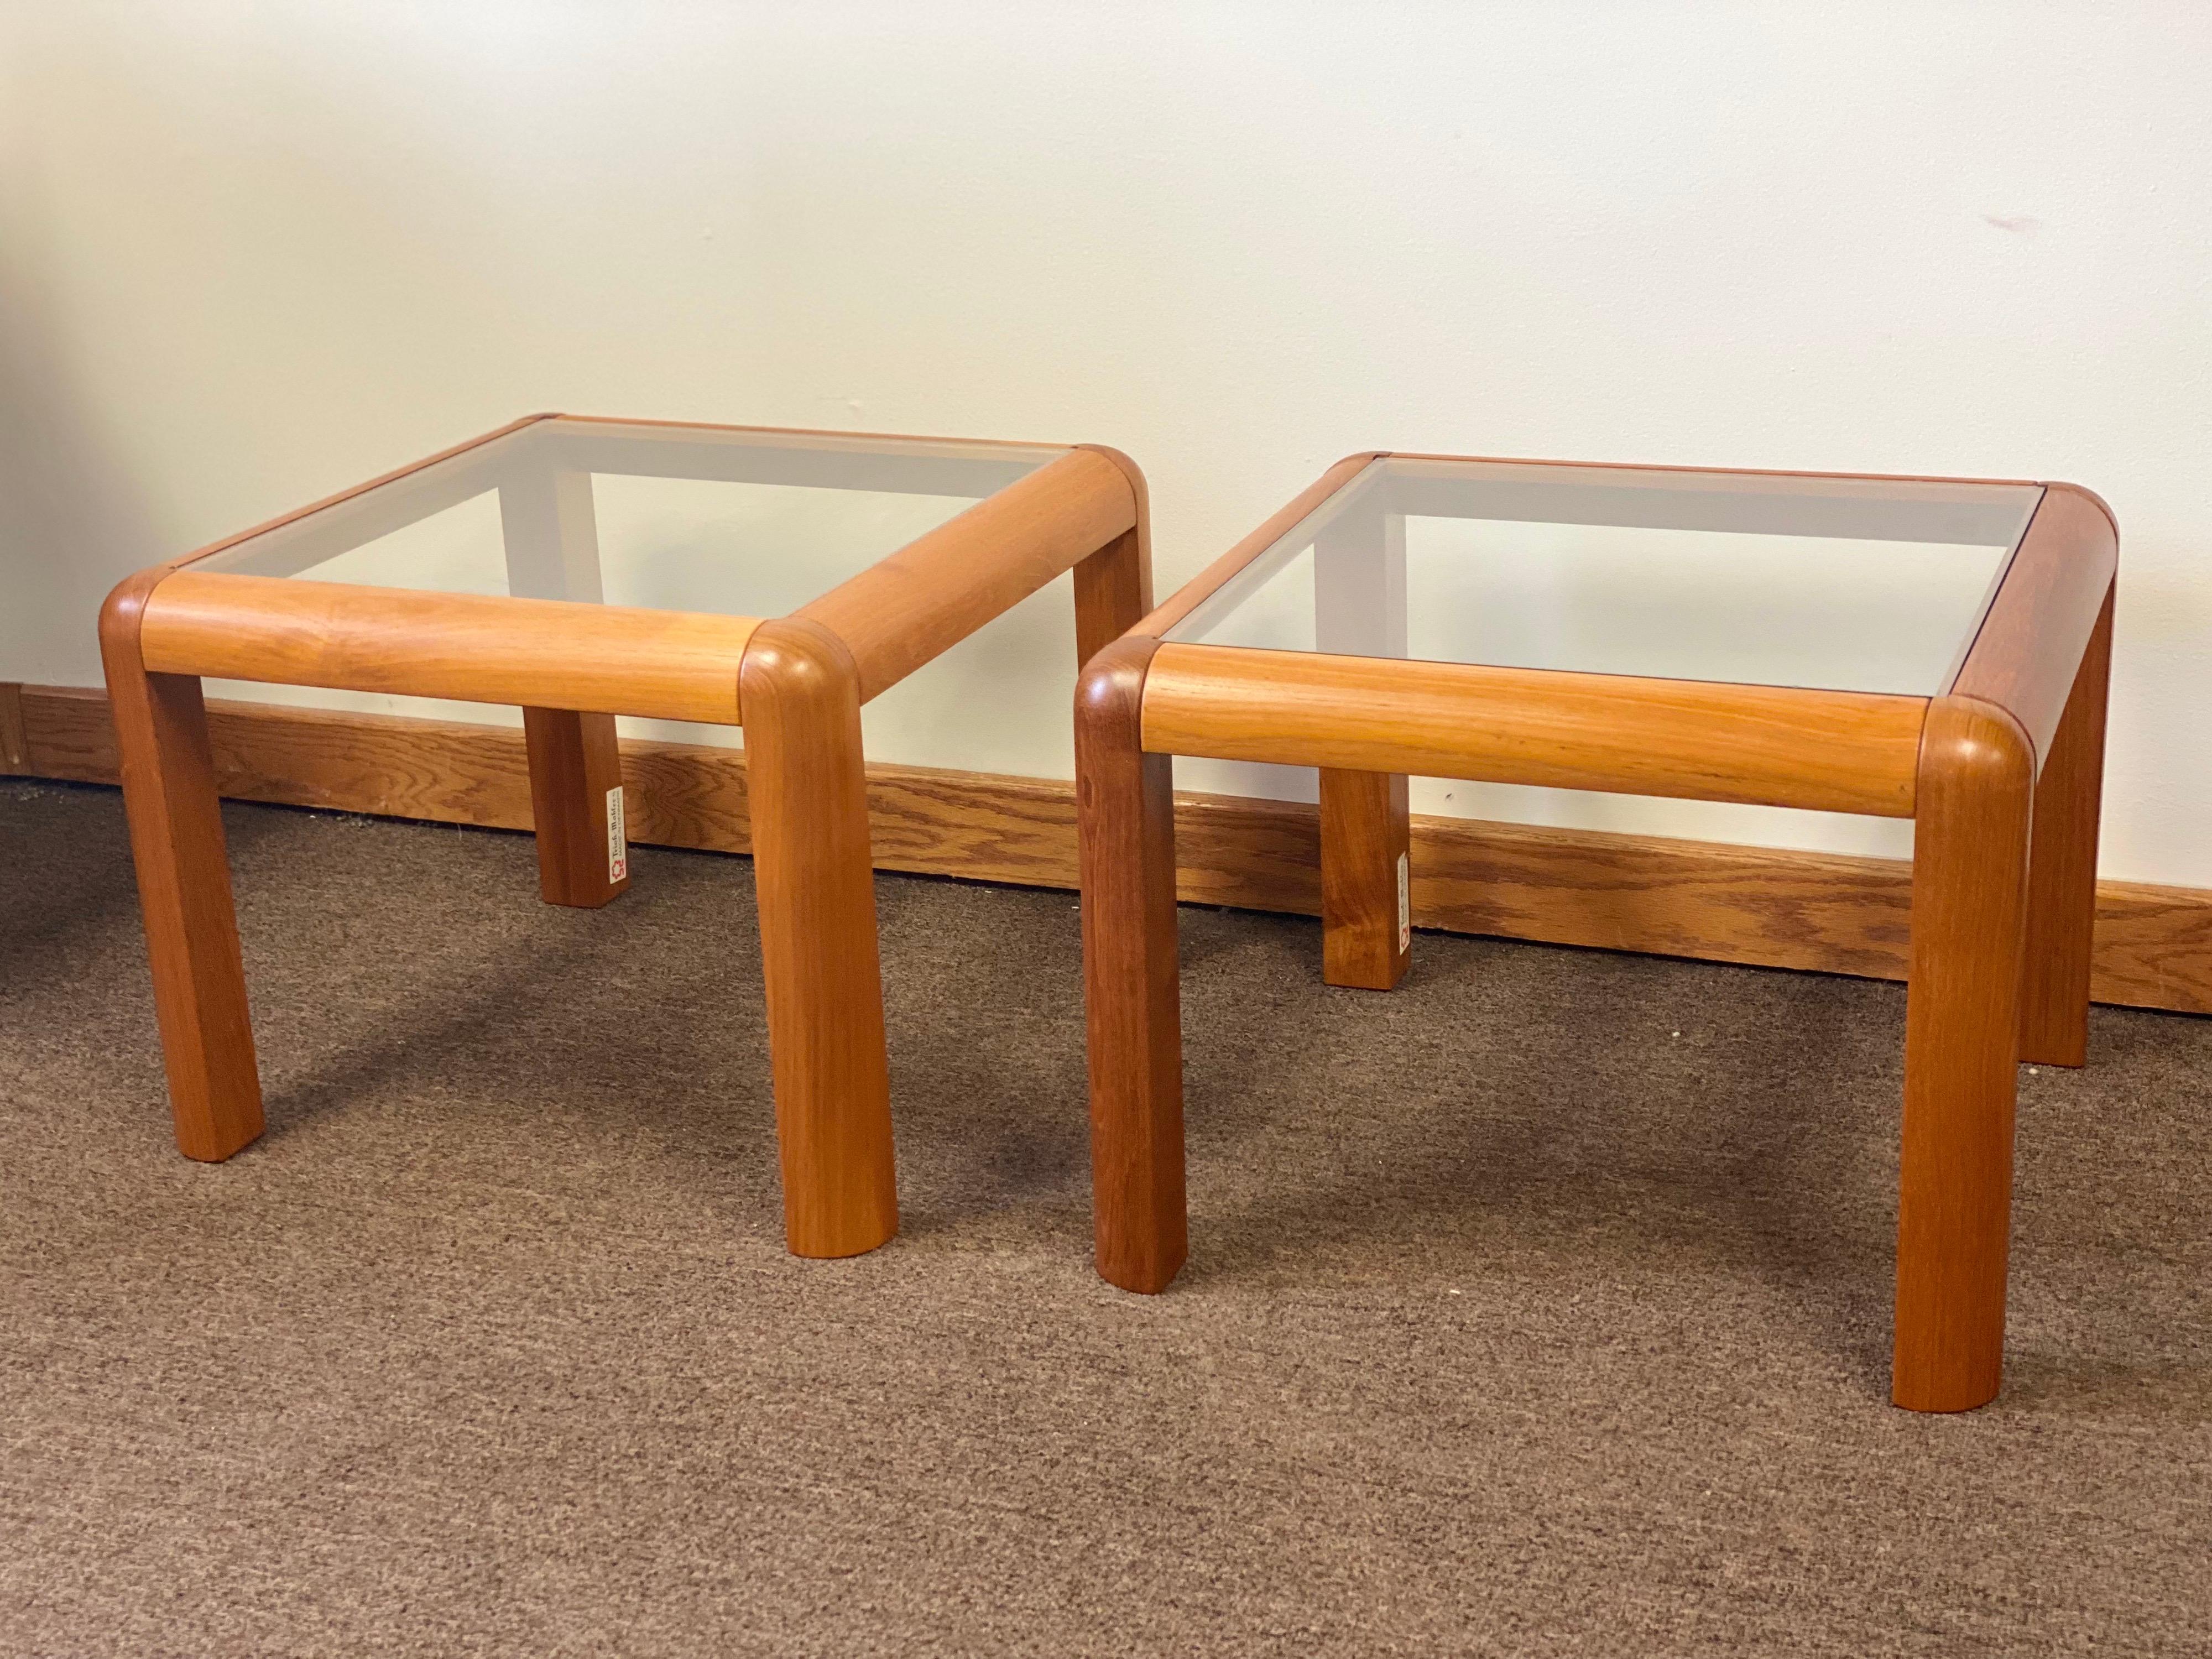 1960s Danish Trioh-Mobler Teak and Glass Square Side Tables, a Pair In Good Condition For Sale In Farmington Hills, MI